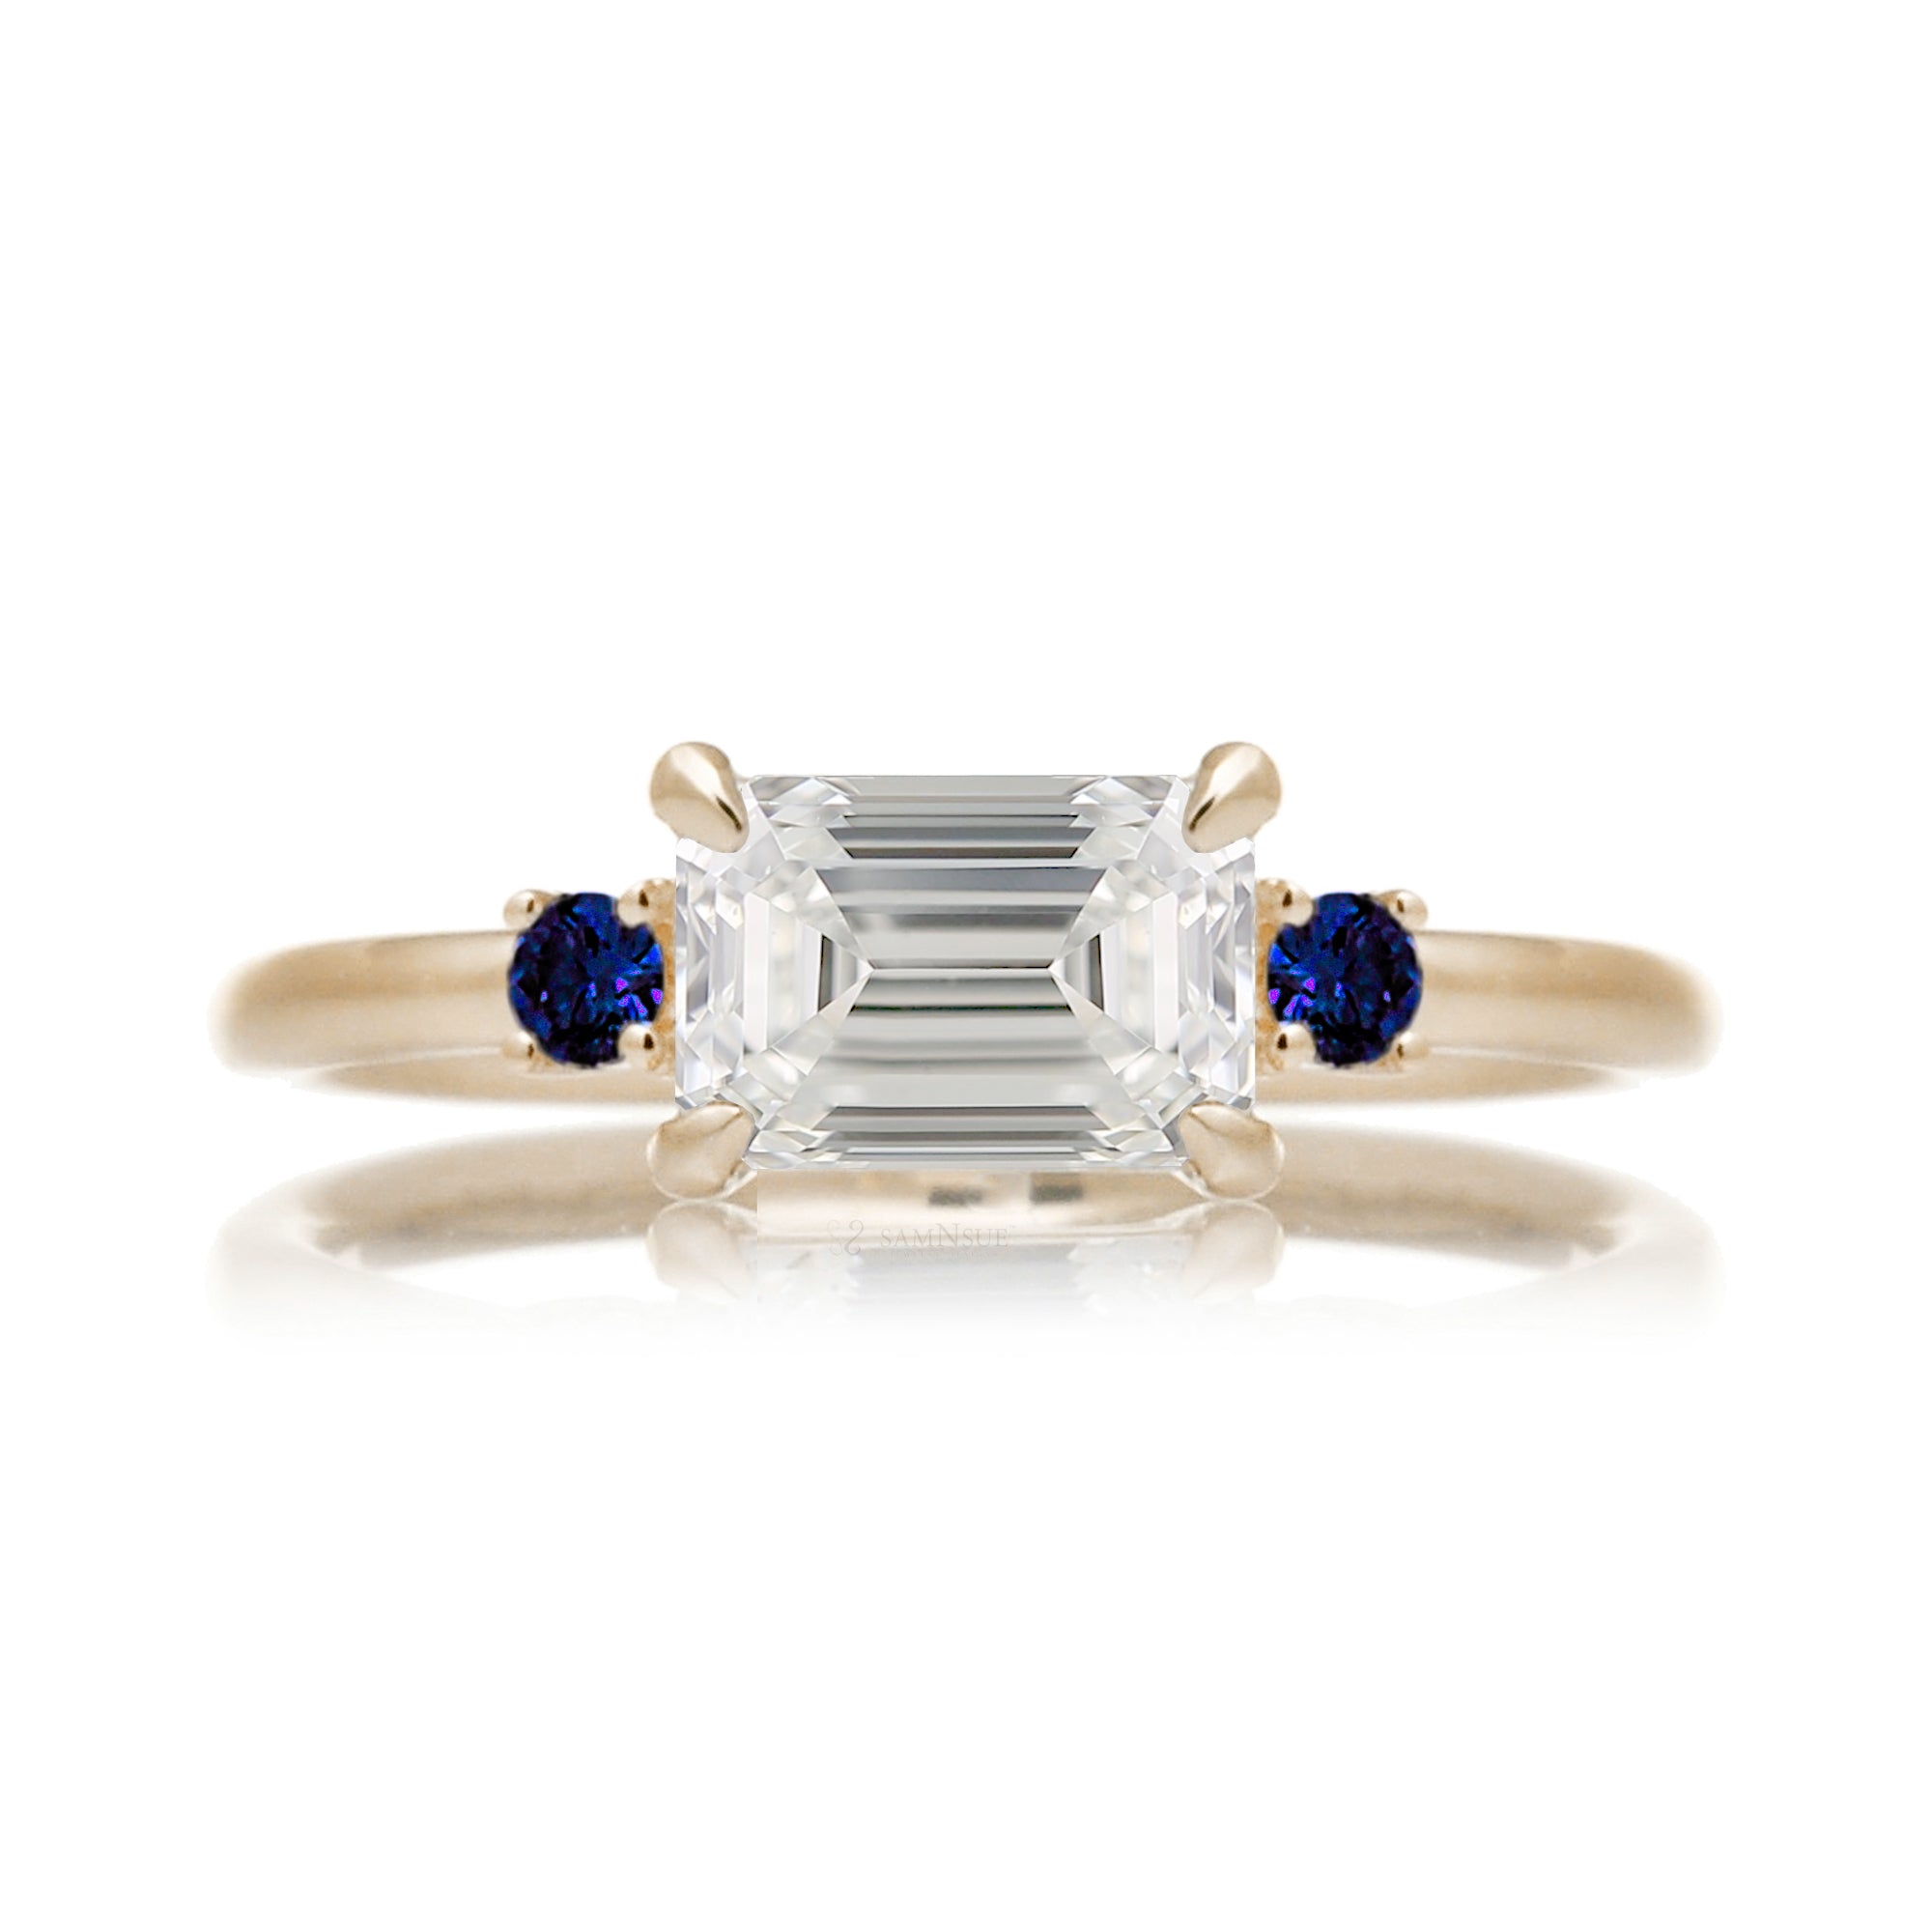 east-west emerald cut diamond three stone ring the Lena with side blue sapphires yellow gold